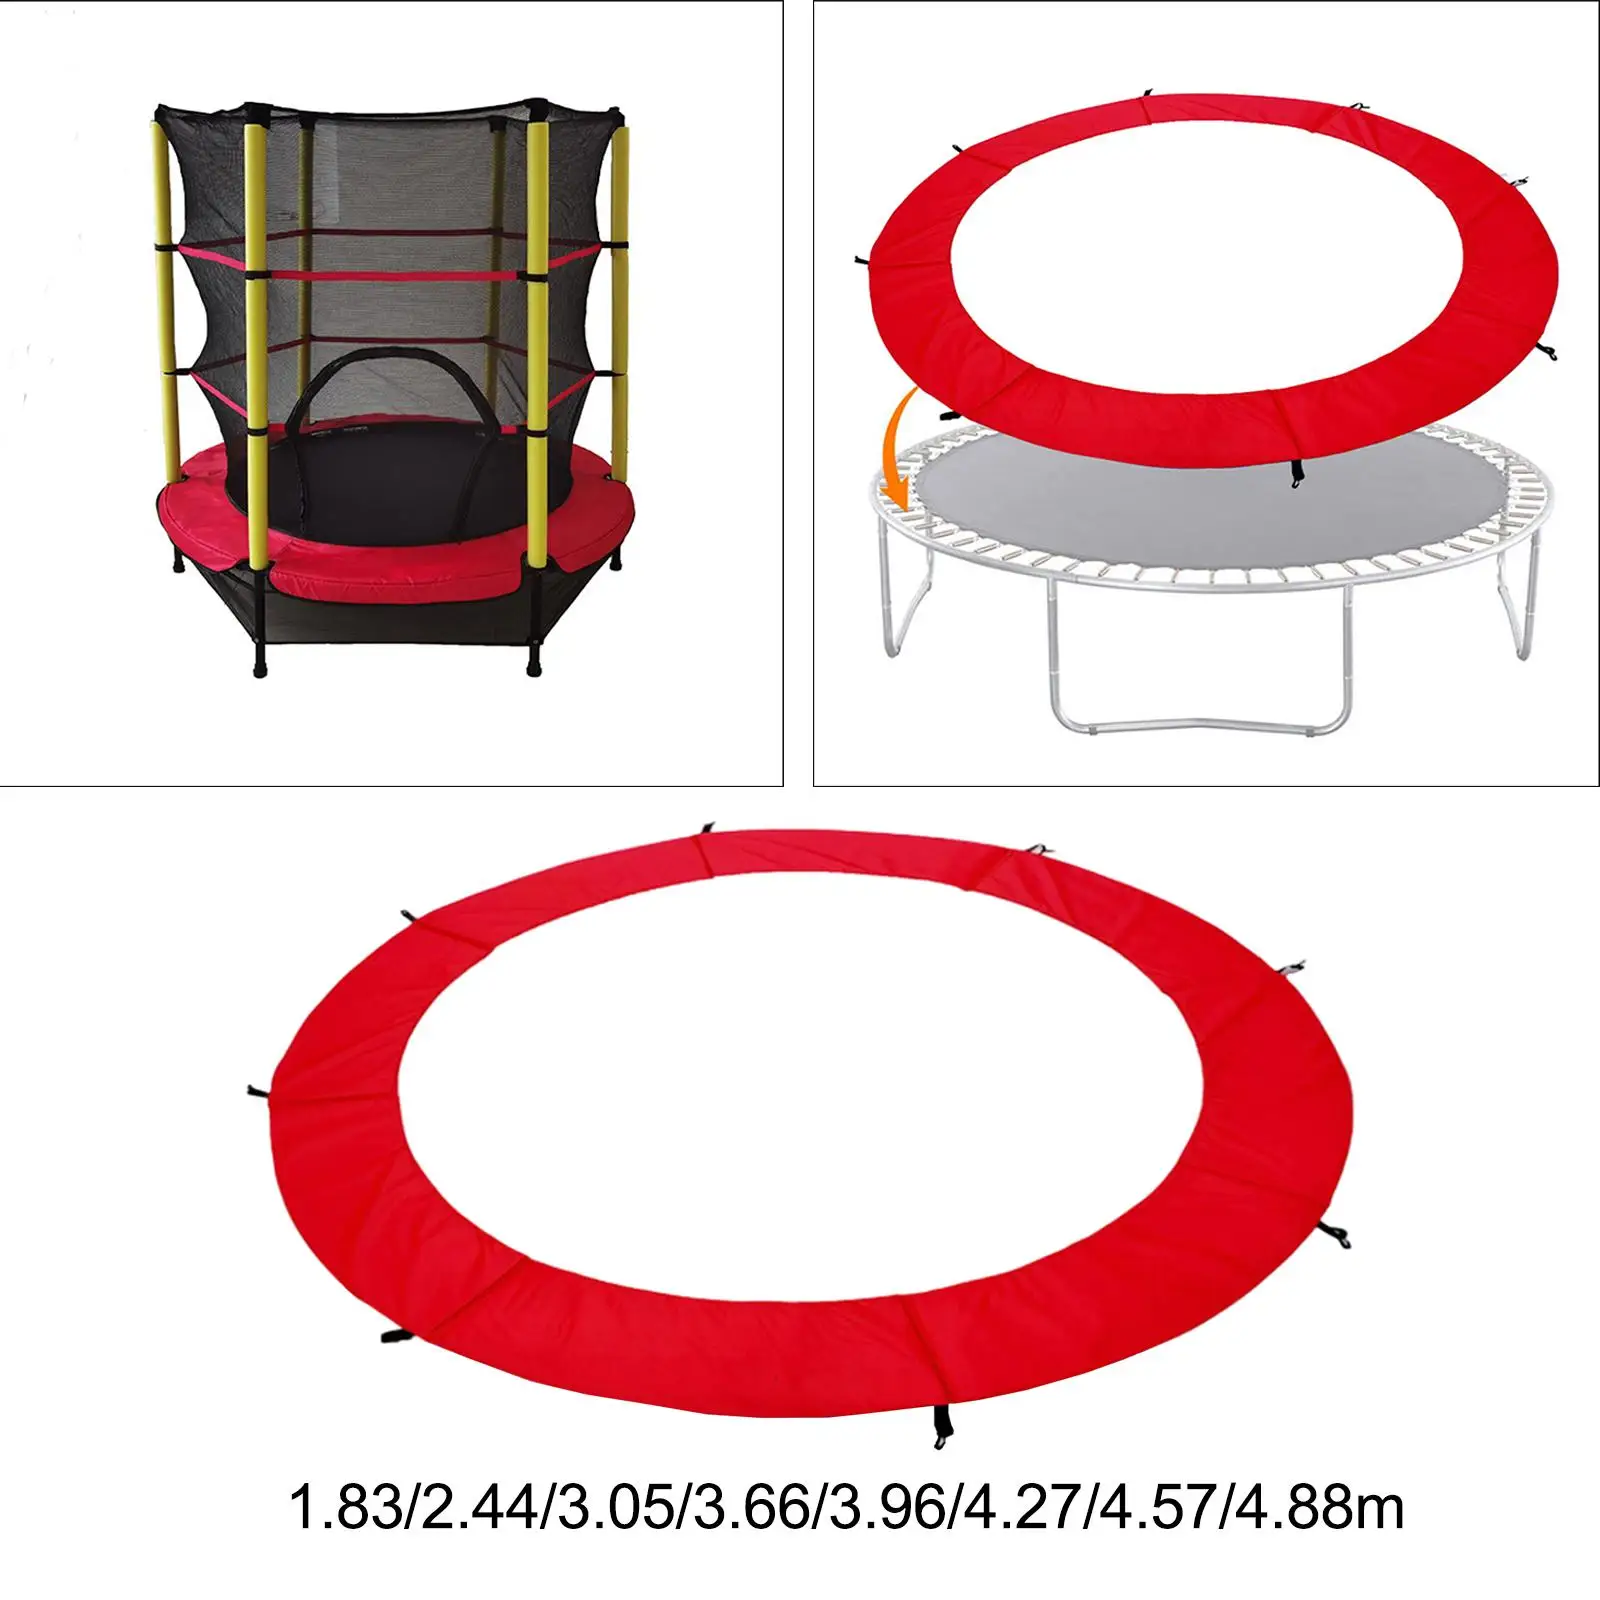 Trampoline Pad Cover Surround Guard Tear Resistant Water Resistant Round Frames Durable Safety Padding 1.2cm Thickness Guard